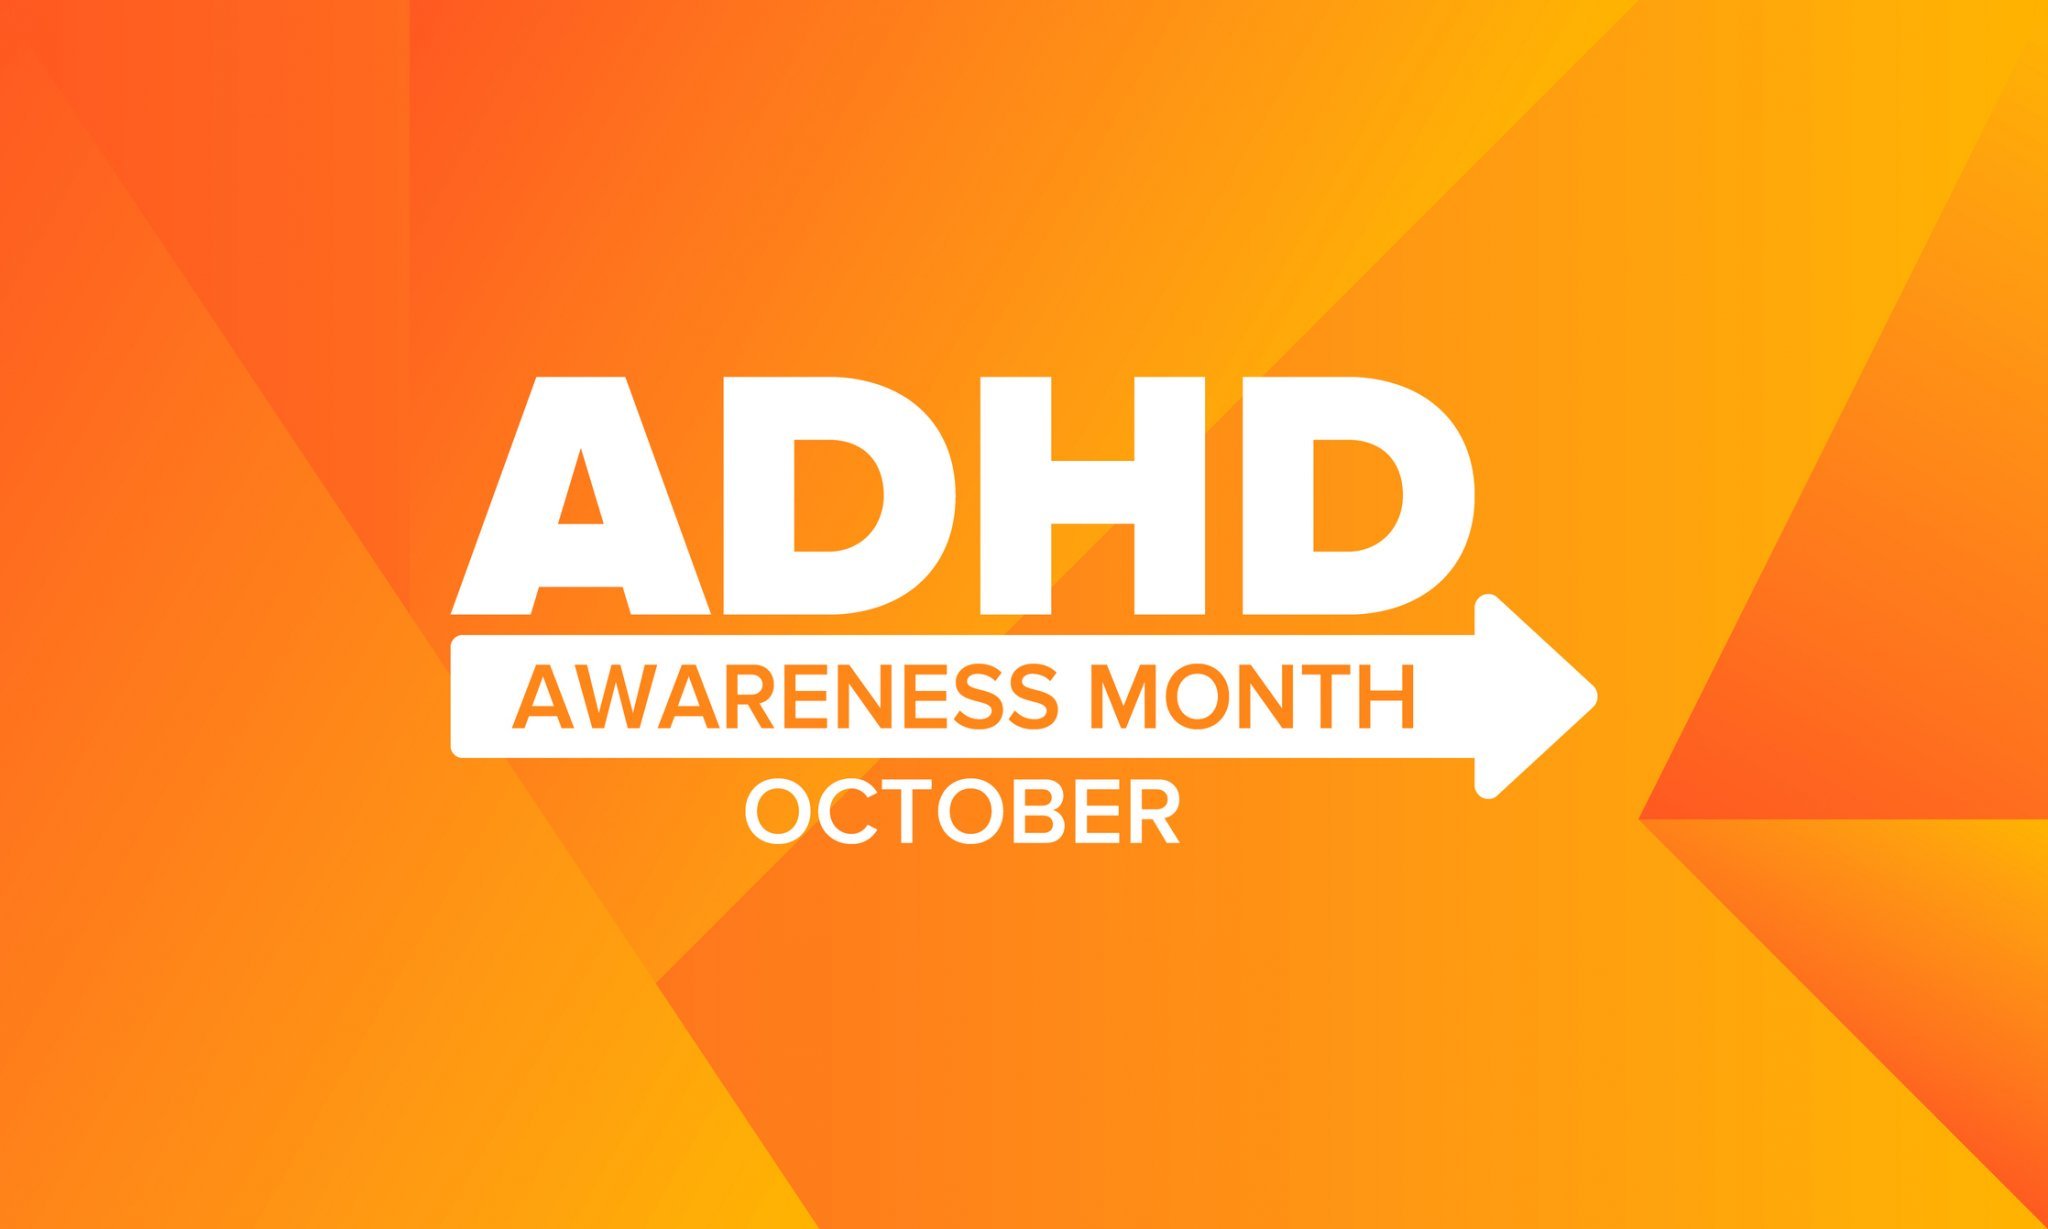 What and When is ADHD Awareness Month?